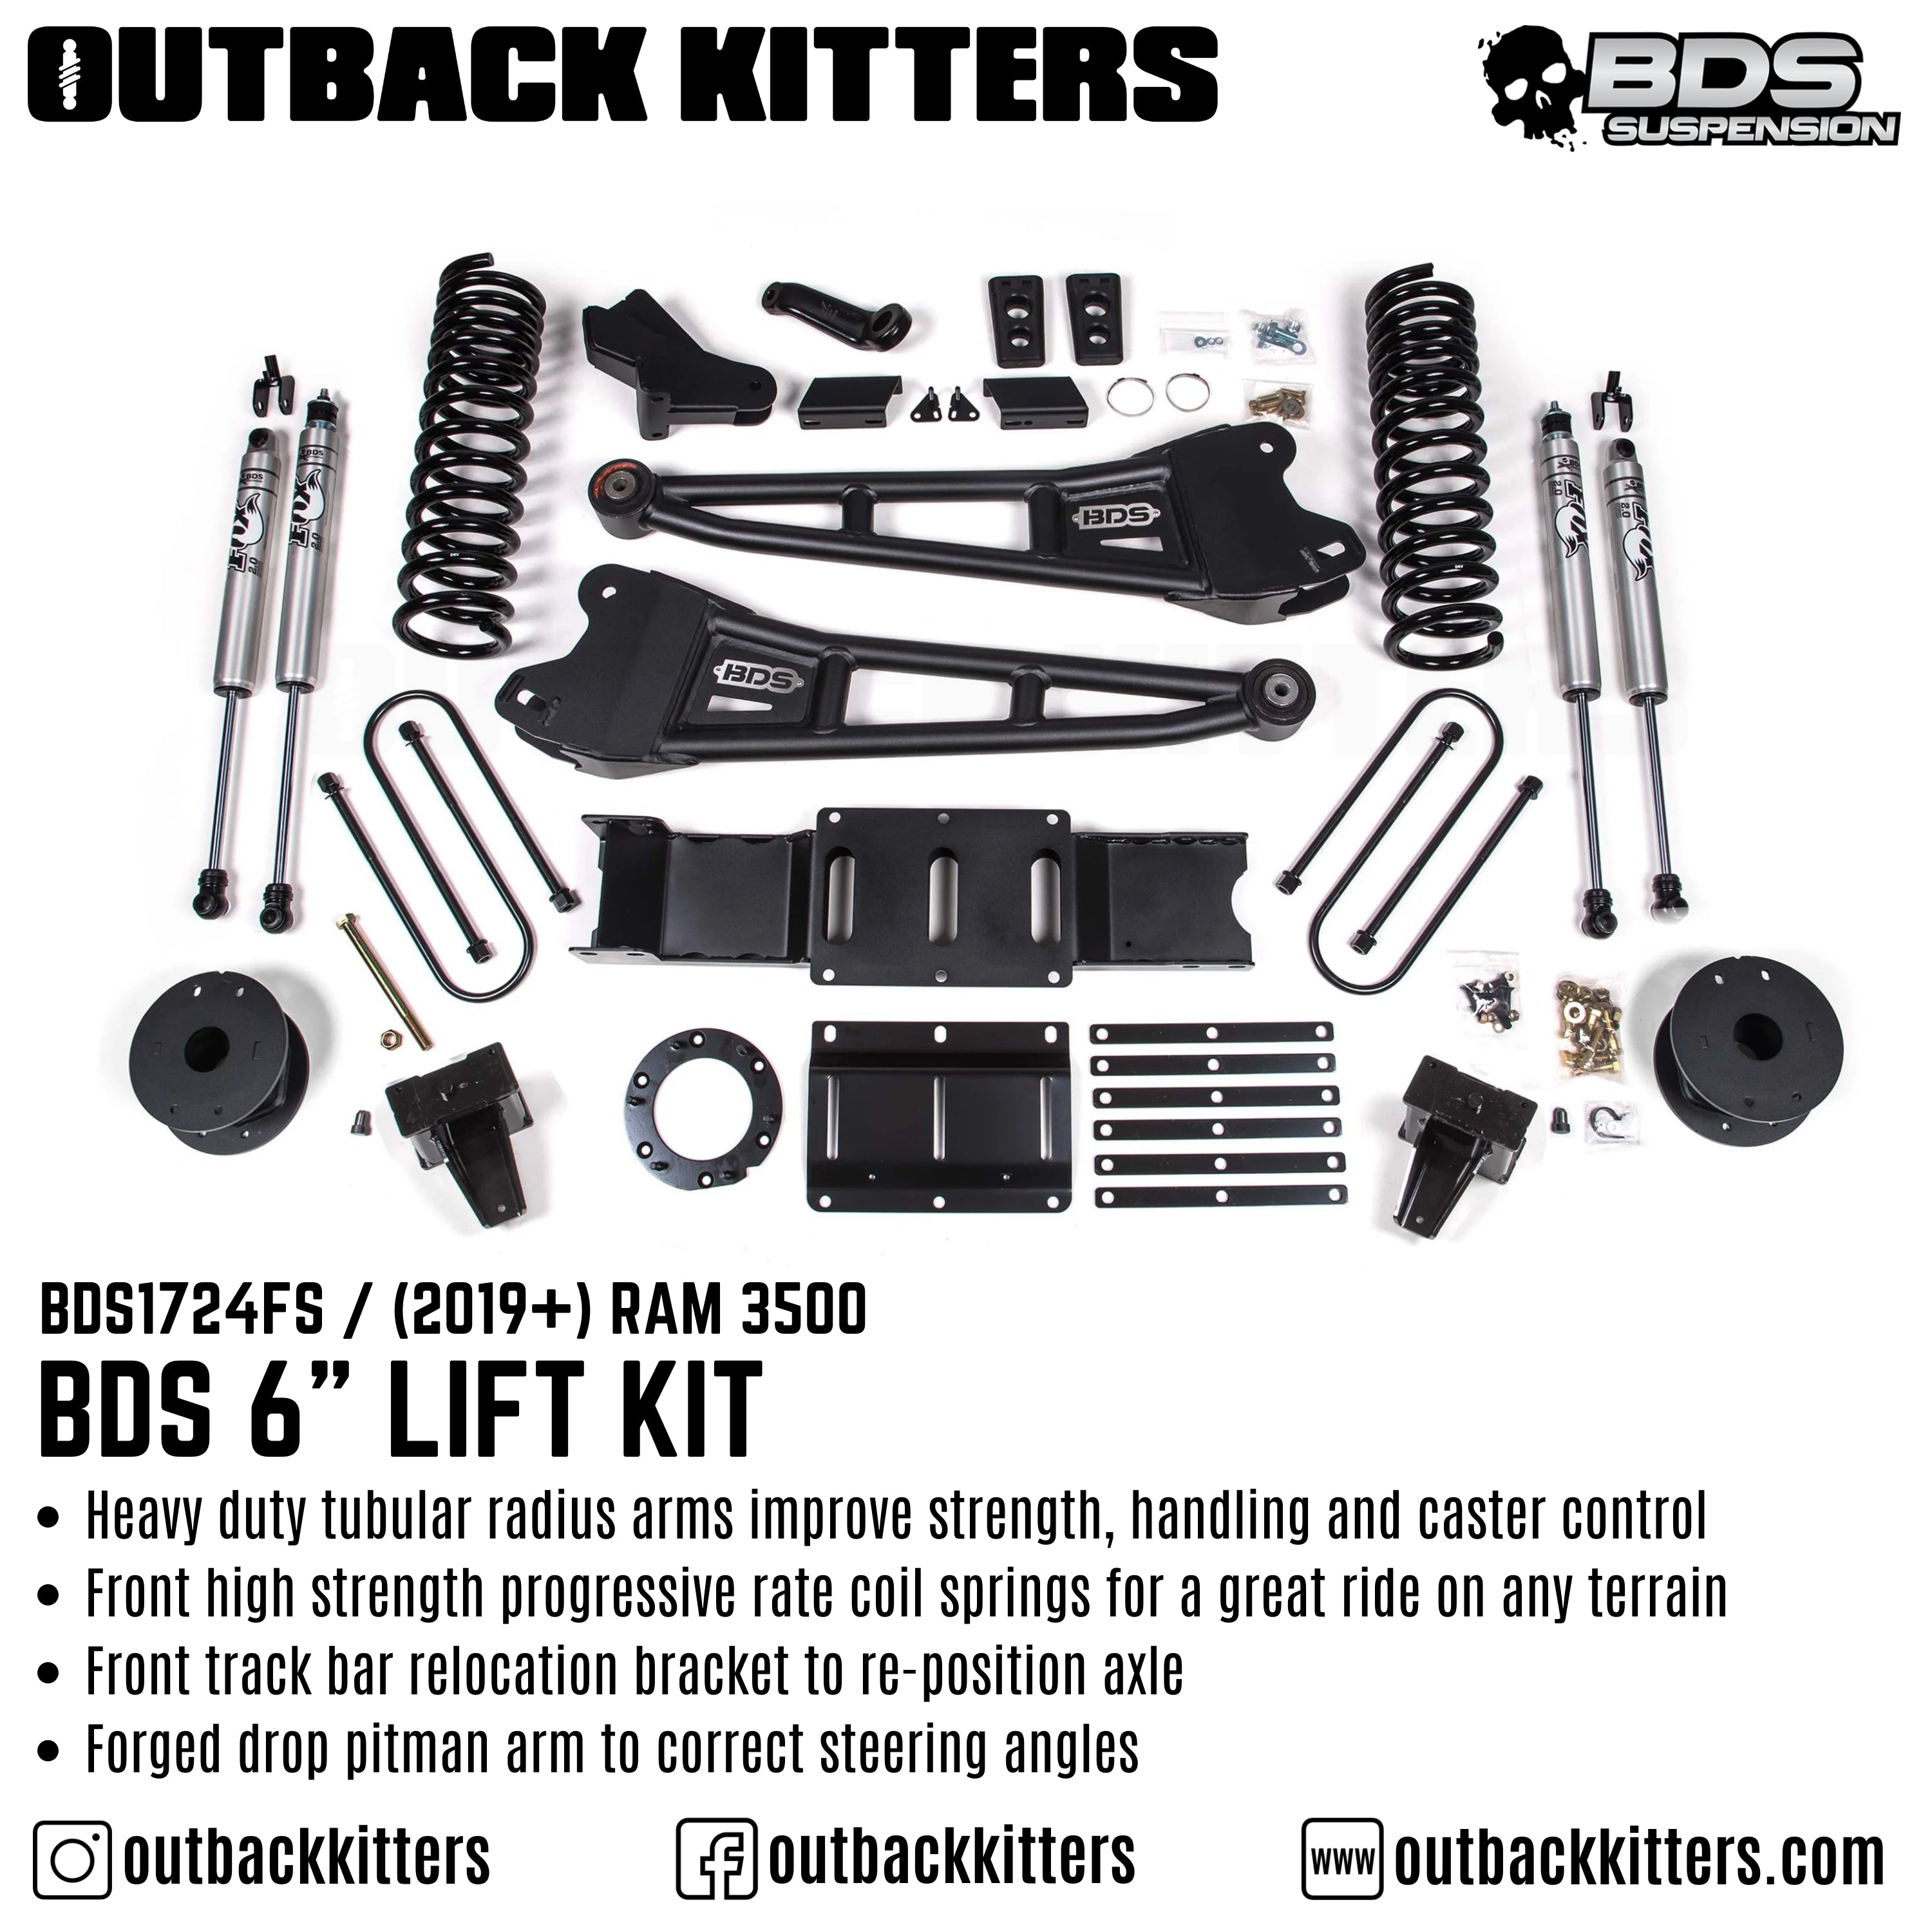 BDS Suspension 6" Lift Kit for 2019+ Ram 3500 with Fox Shocks - Outback Kitters